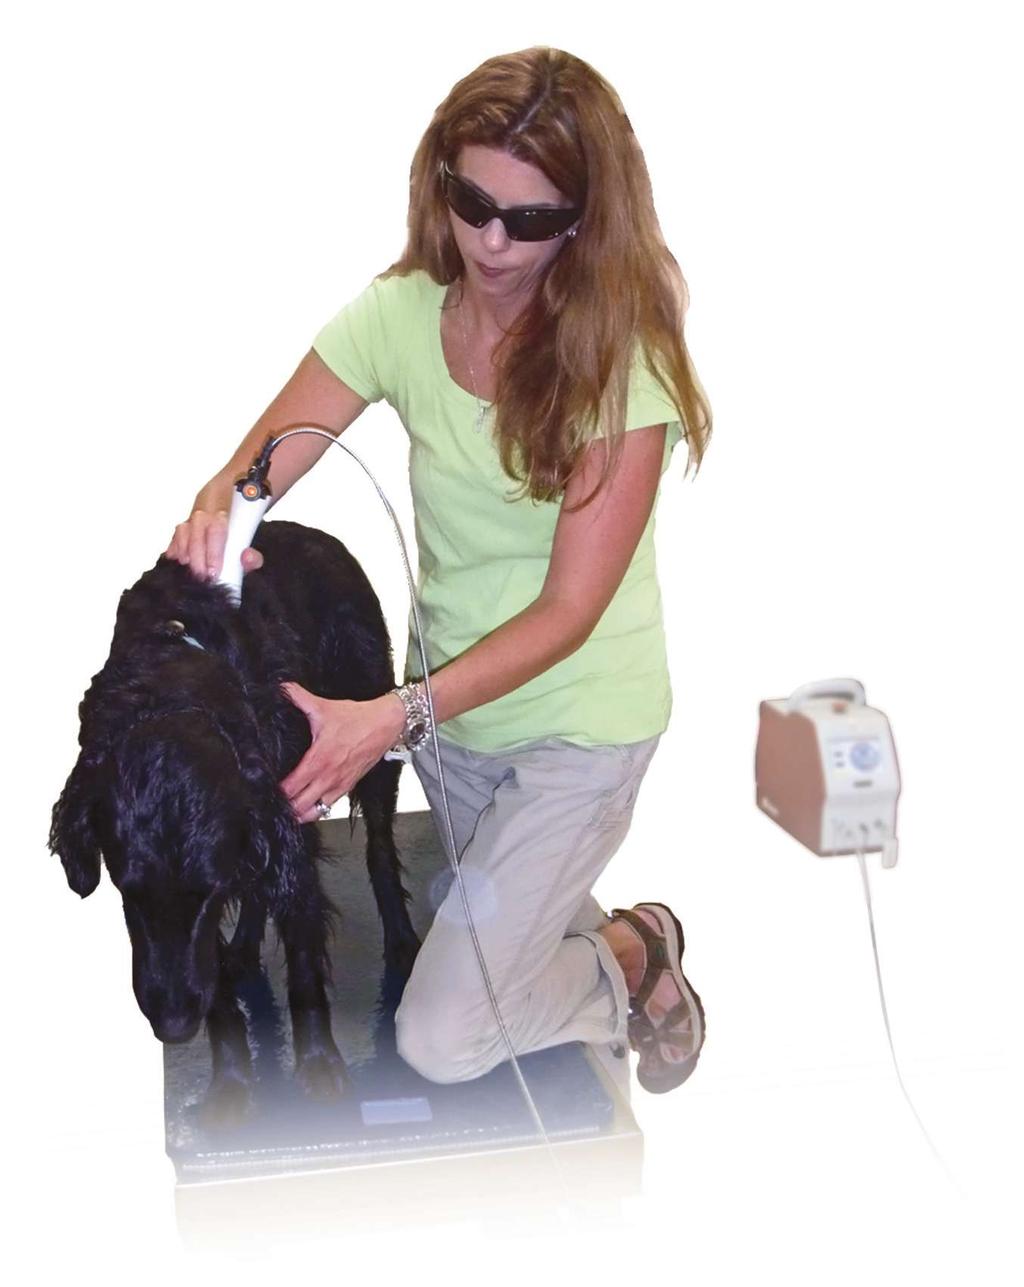 Peer reviewed Rehab RX early rehabilitation: Modalities and exercises Debbie Gross Saunders, DPT, MSPT, CCRP, Diplomate ABPTS Read Pain Assessment in Dogs & Cats (March/ april 2012, available at